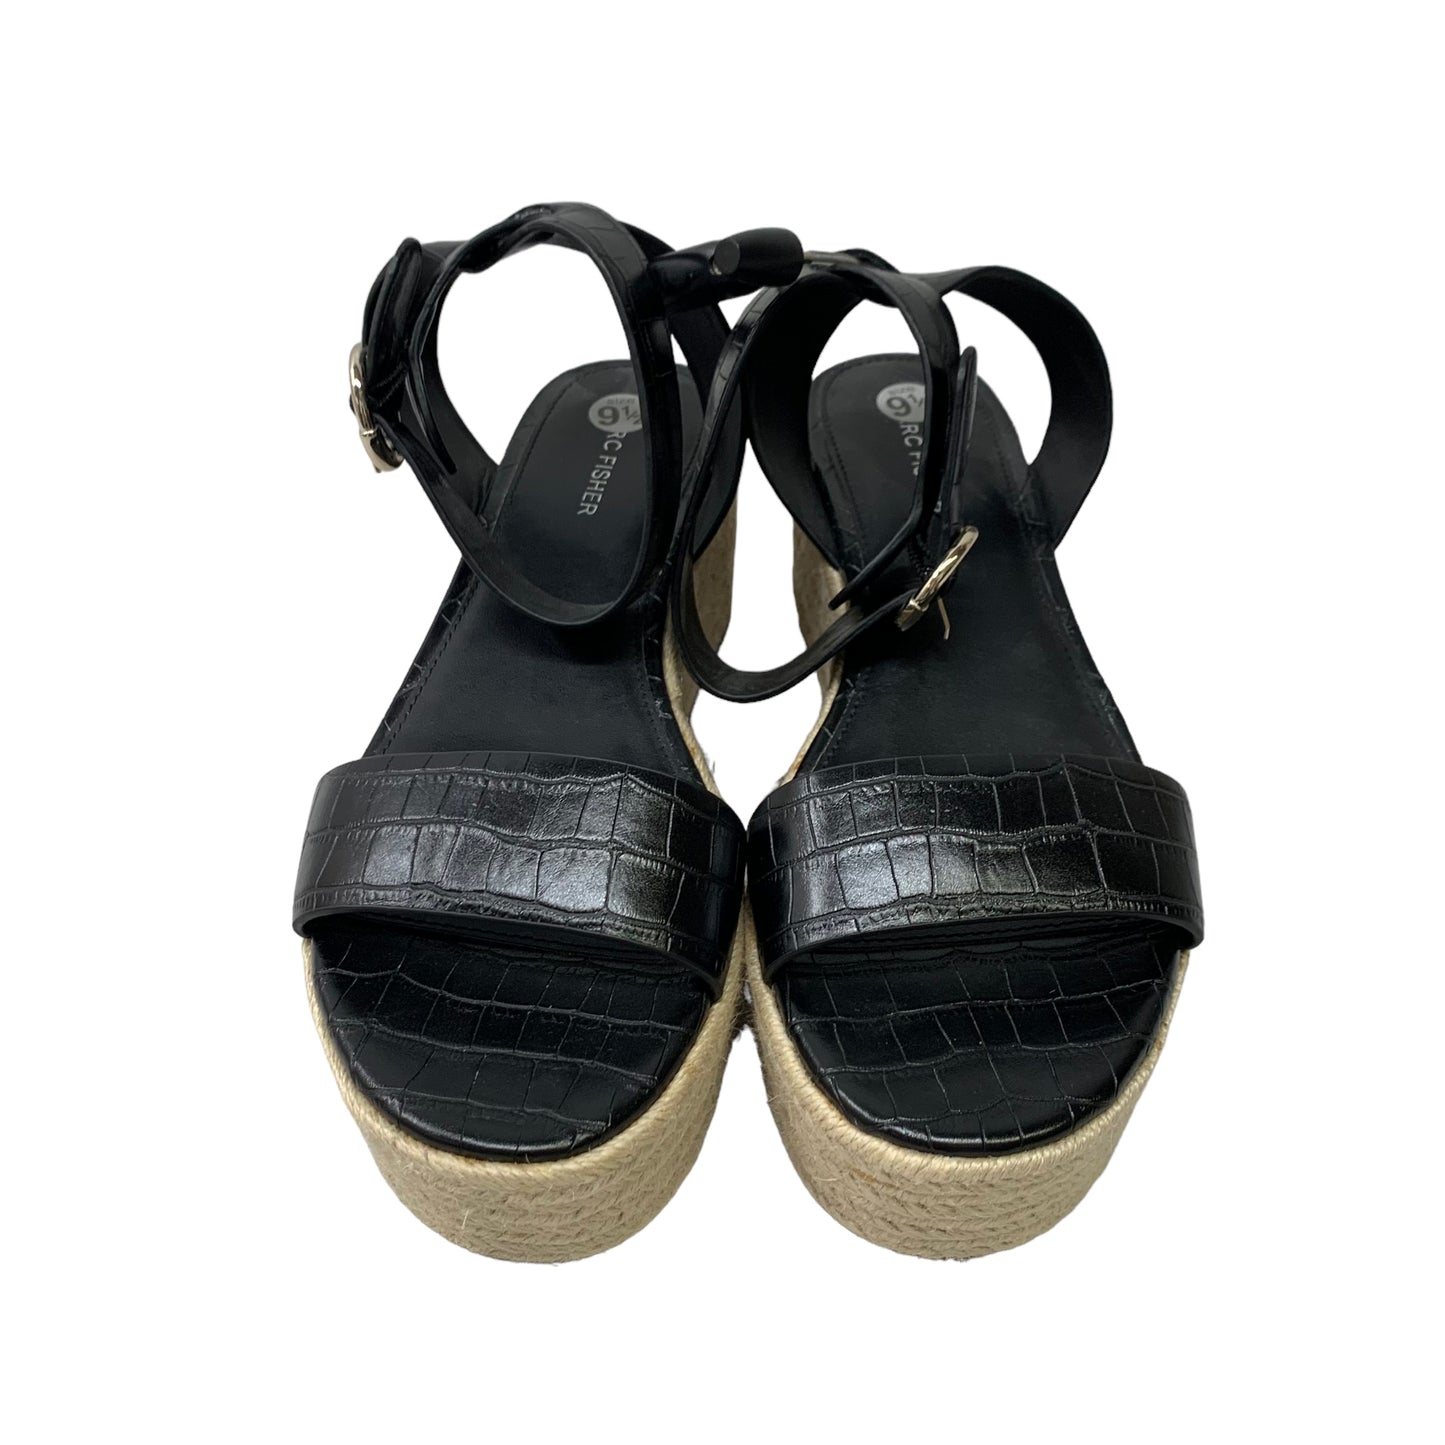 Sandals Heels Wedge By Marc Fisher  Size: 9.5